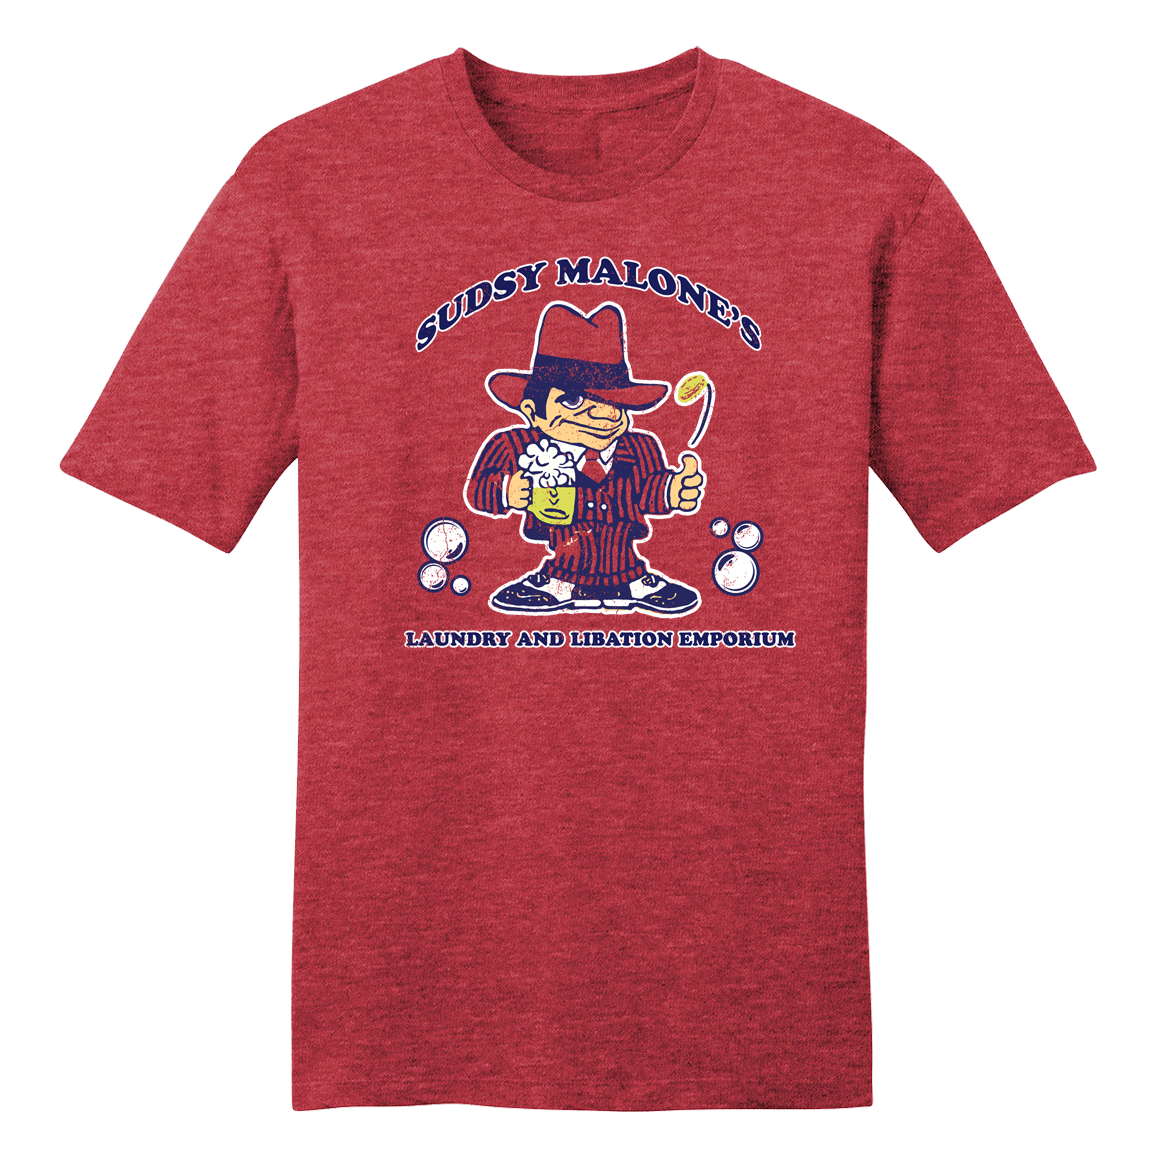 Sudsy Malone's Red T-shirt Old School Shirts